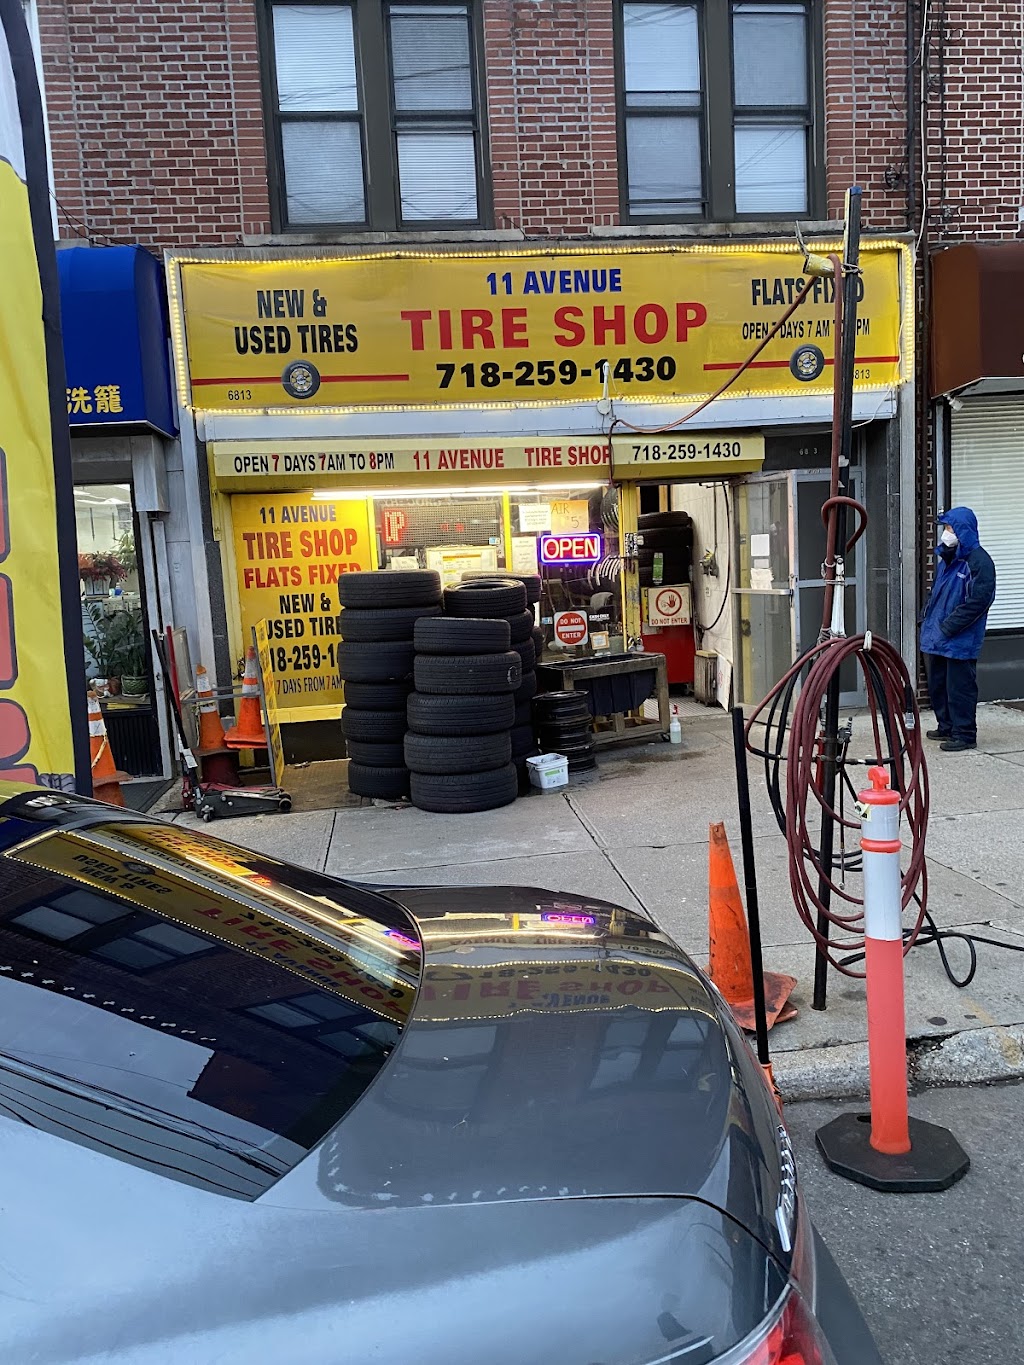 60th St Tire Shop Corp | 1201 60th St, Brooklyn, NY 11219 | Phone: (718) 600-4127